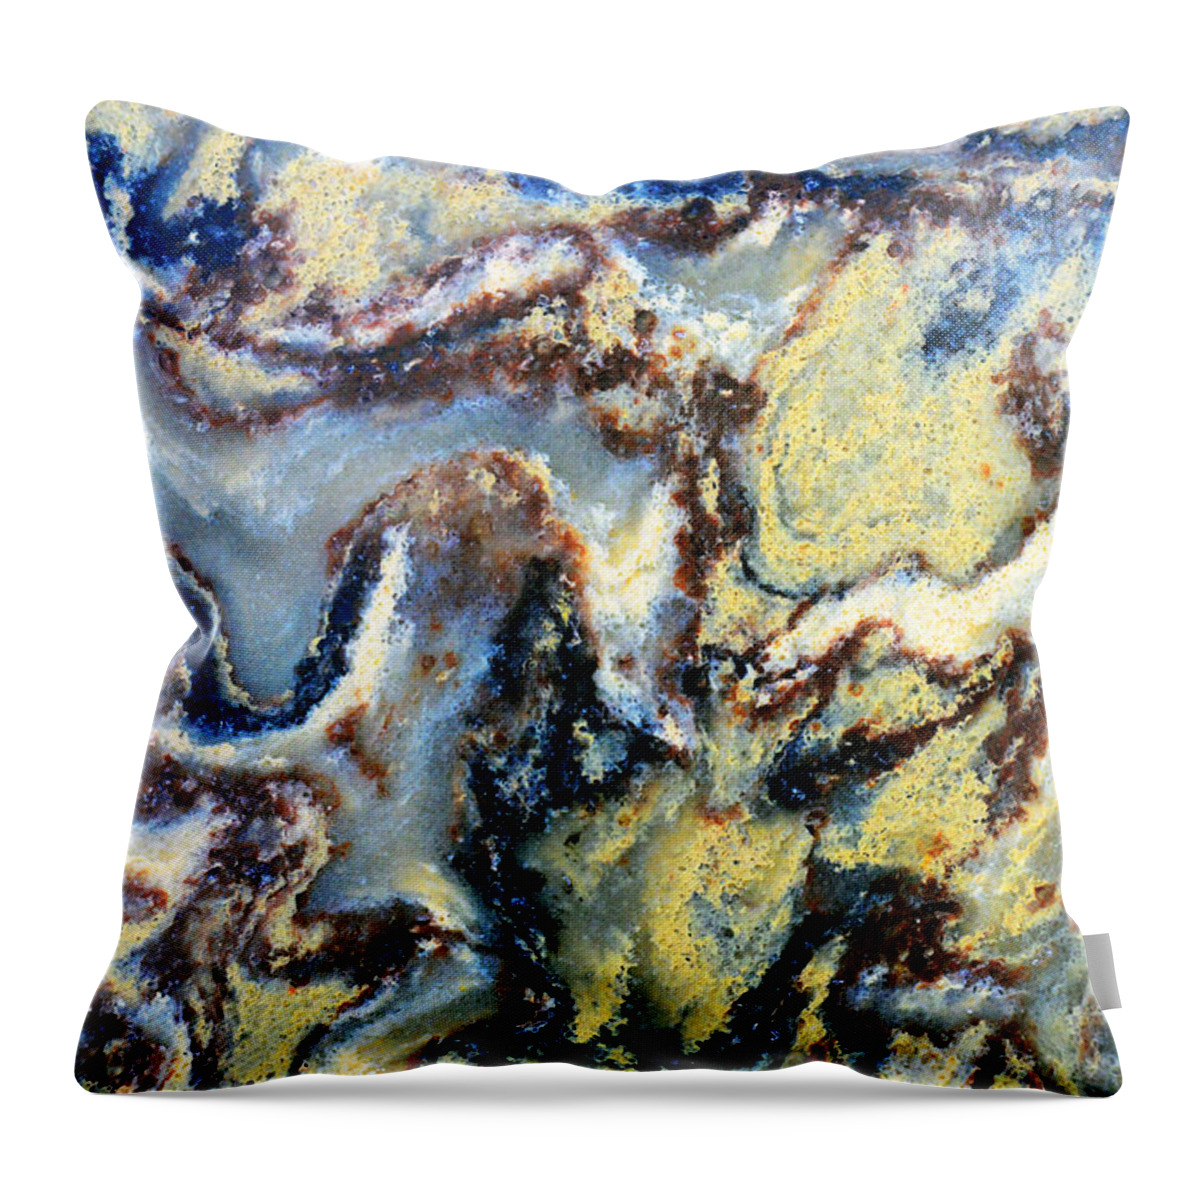 Abstract Throw Pillow featuring the photograph Patterns in Stone - 95 by Paul W Faust - Impressions of Light